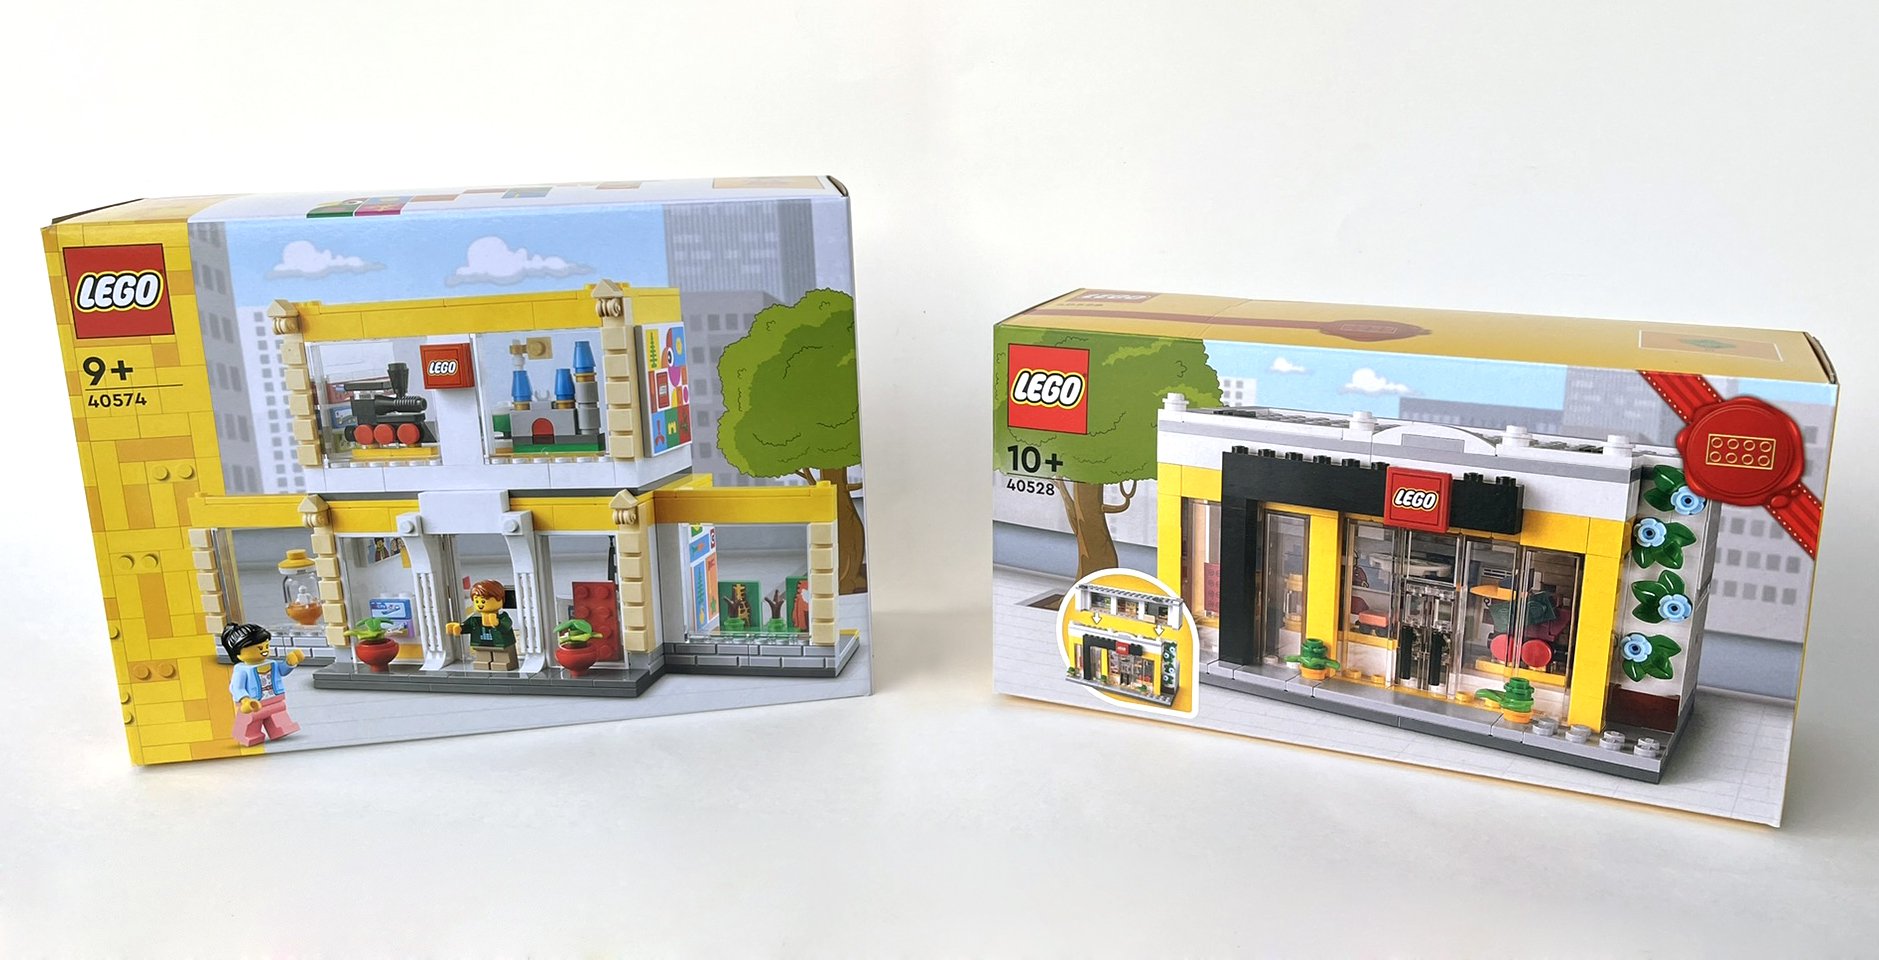 Oxide Sæt ud variabel LEGO LEGO Stores: The Ultimate Ultimate Guide - BrickNerd - All things LEGO  and the LEGO fan community